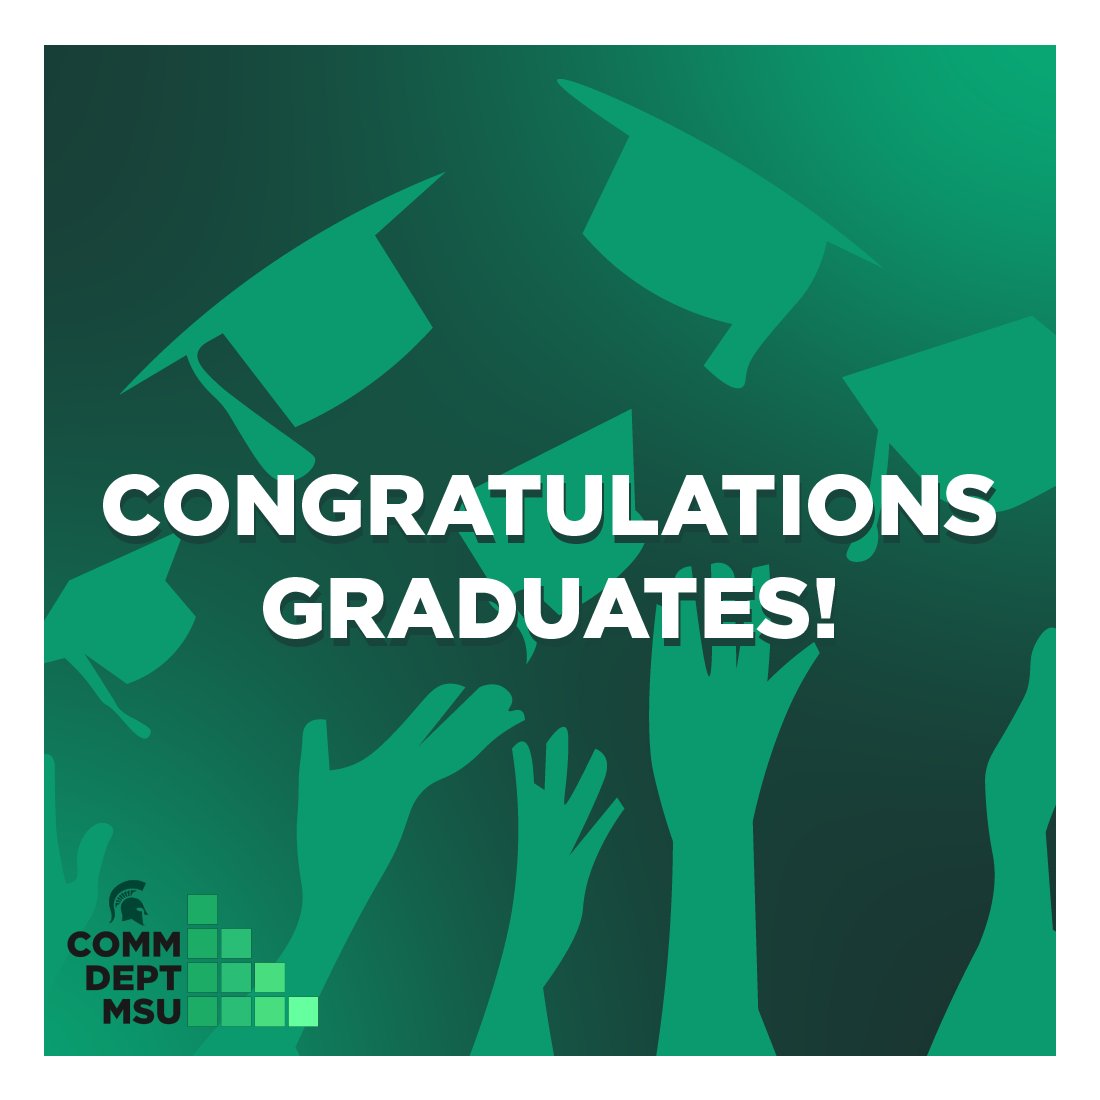 Congratulations to all of our 2024 graduates! We are extremely proud of you and can't wait to see where your career takes you. Stay in touch and enjoy your summer, you've earned it!